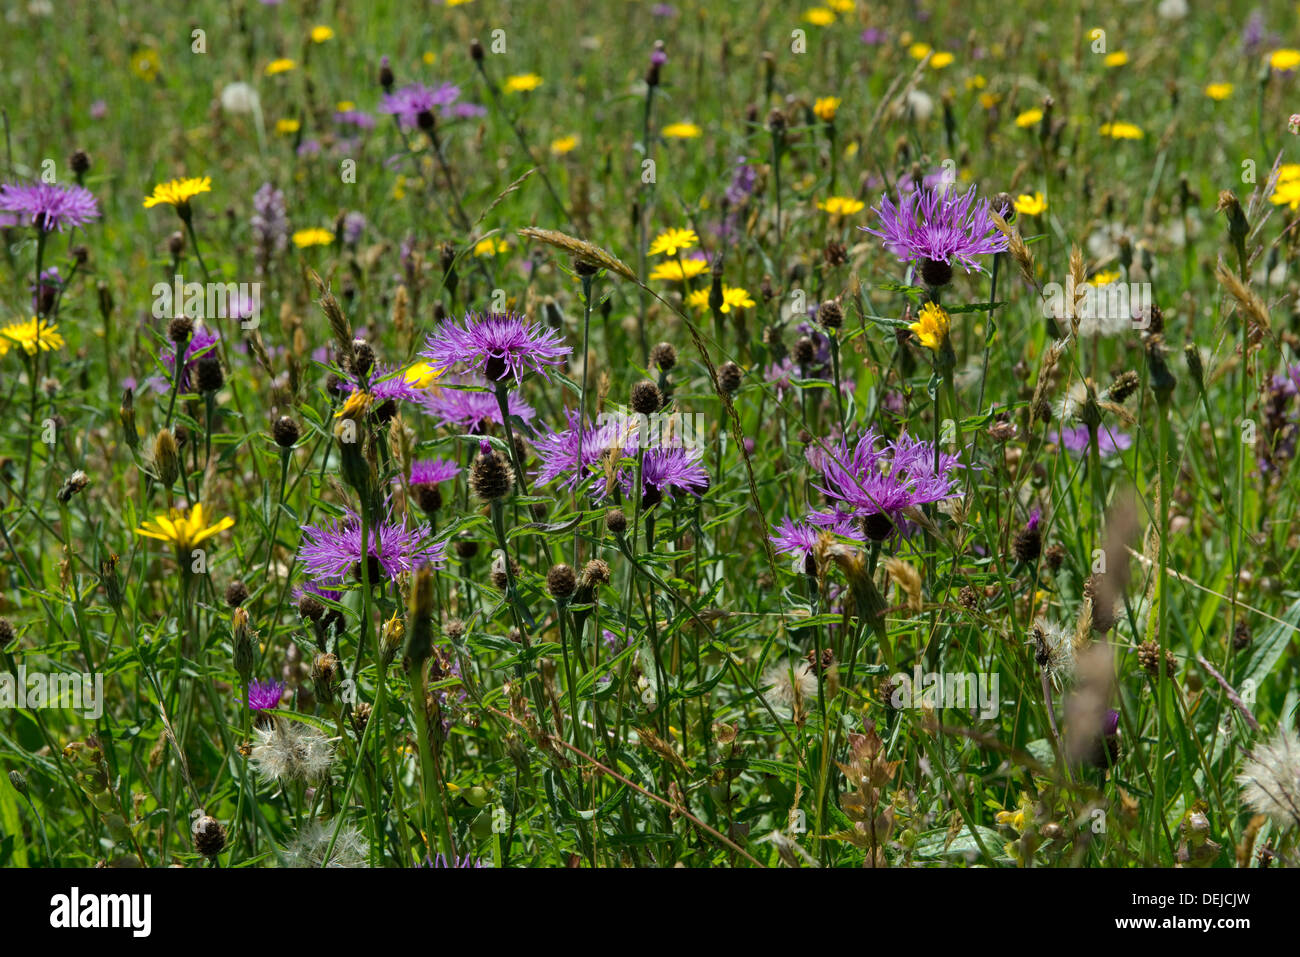 Greater knapweed, Centaurea scabiosa, flowering with other plants in a flower meadow Stock Photo